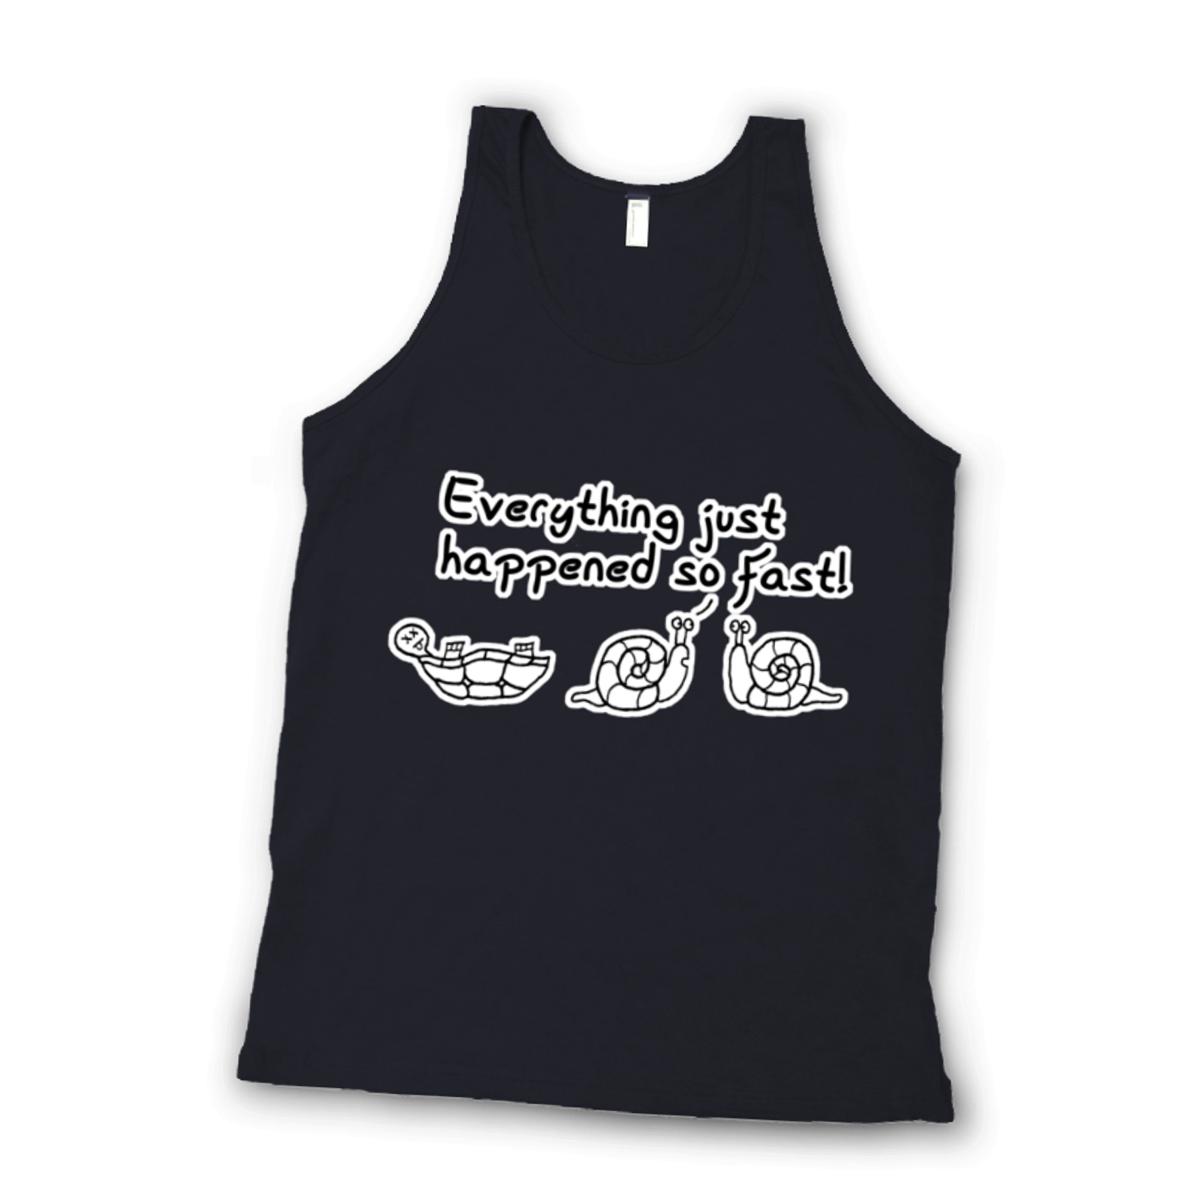 Happened So Fast Unisex Tank Top Extra Small black